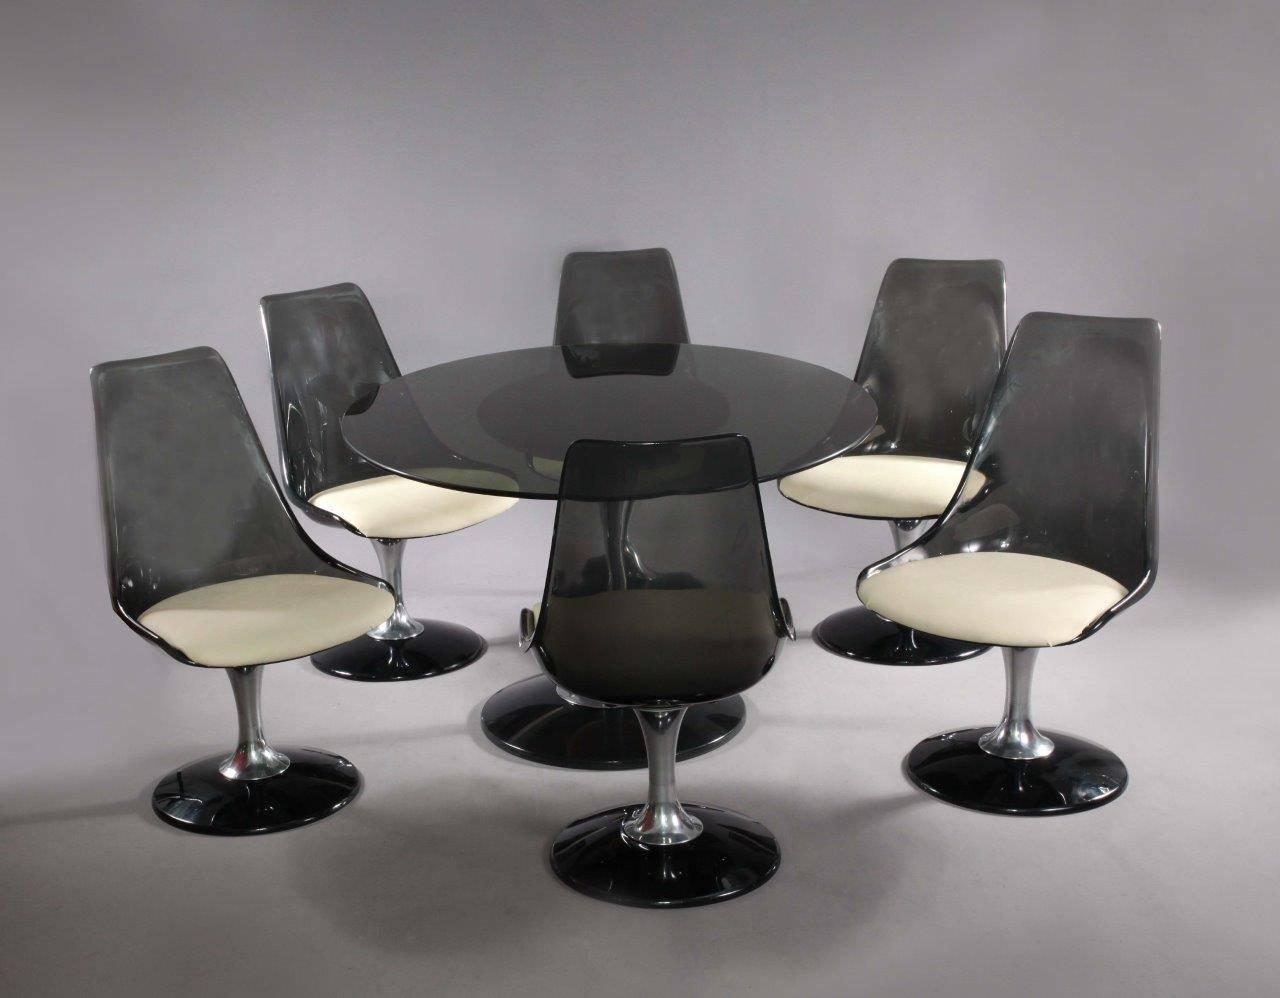 Space Age Chromcraft Smoke Lucite Dining Set: Six Swiveling Tulip Chairs and Oval Table